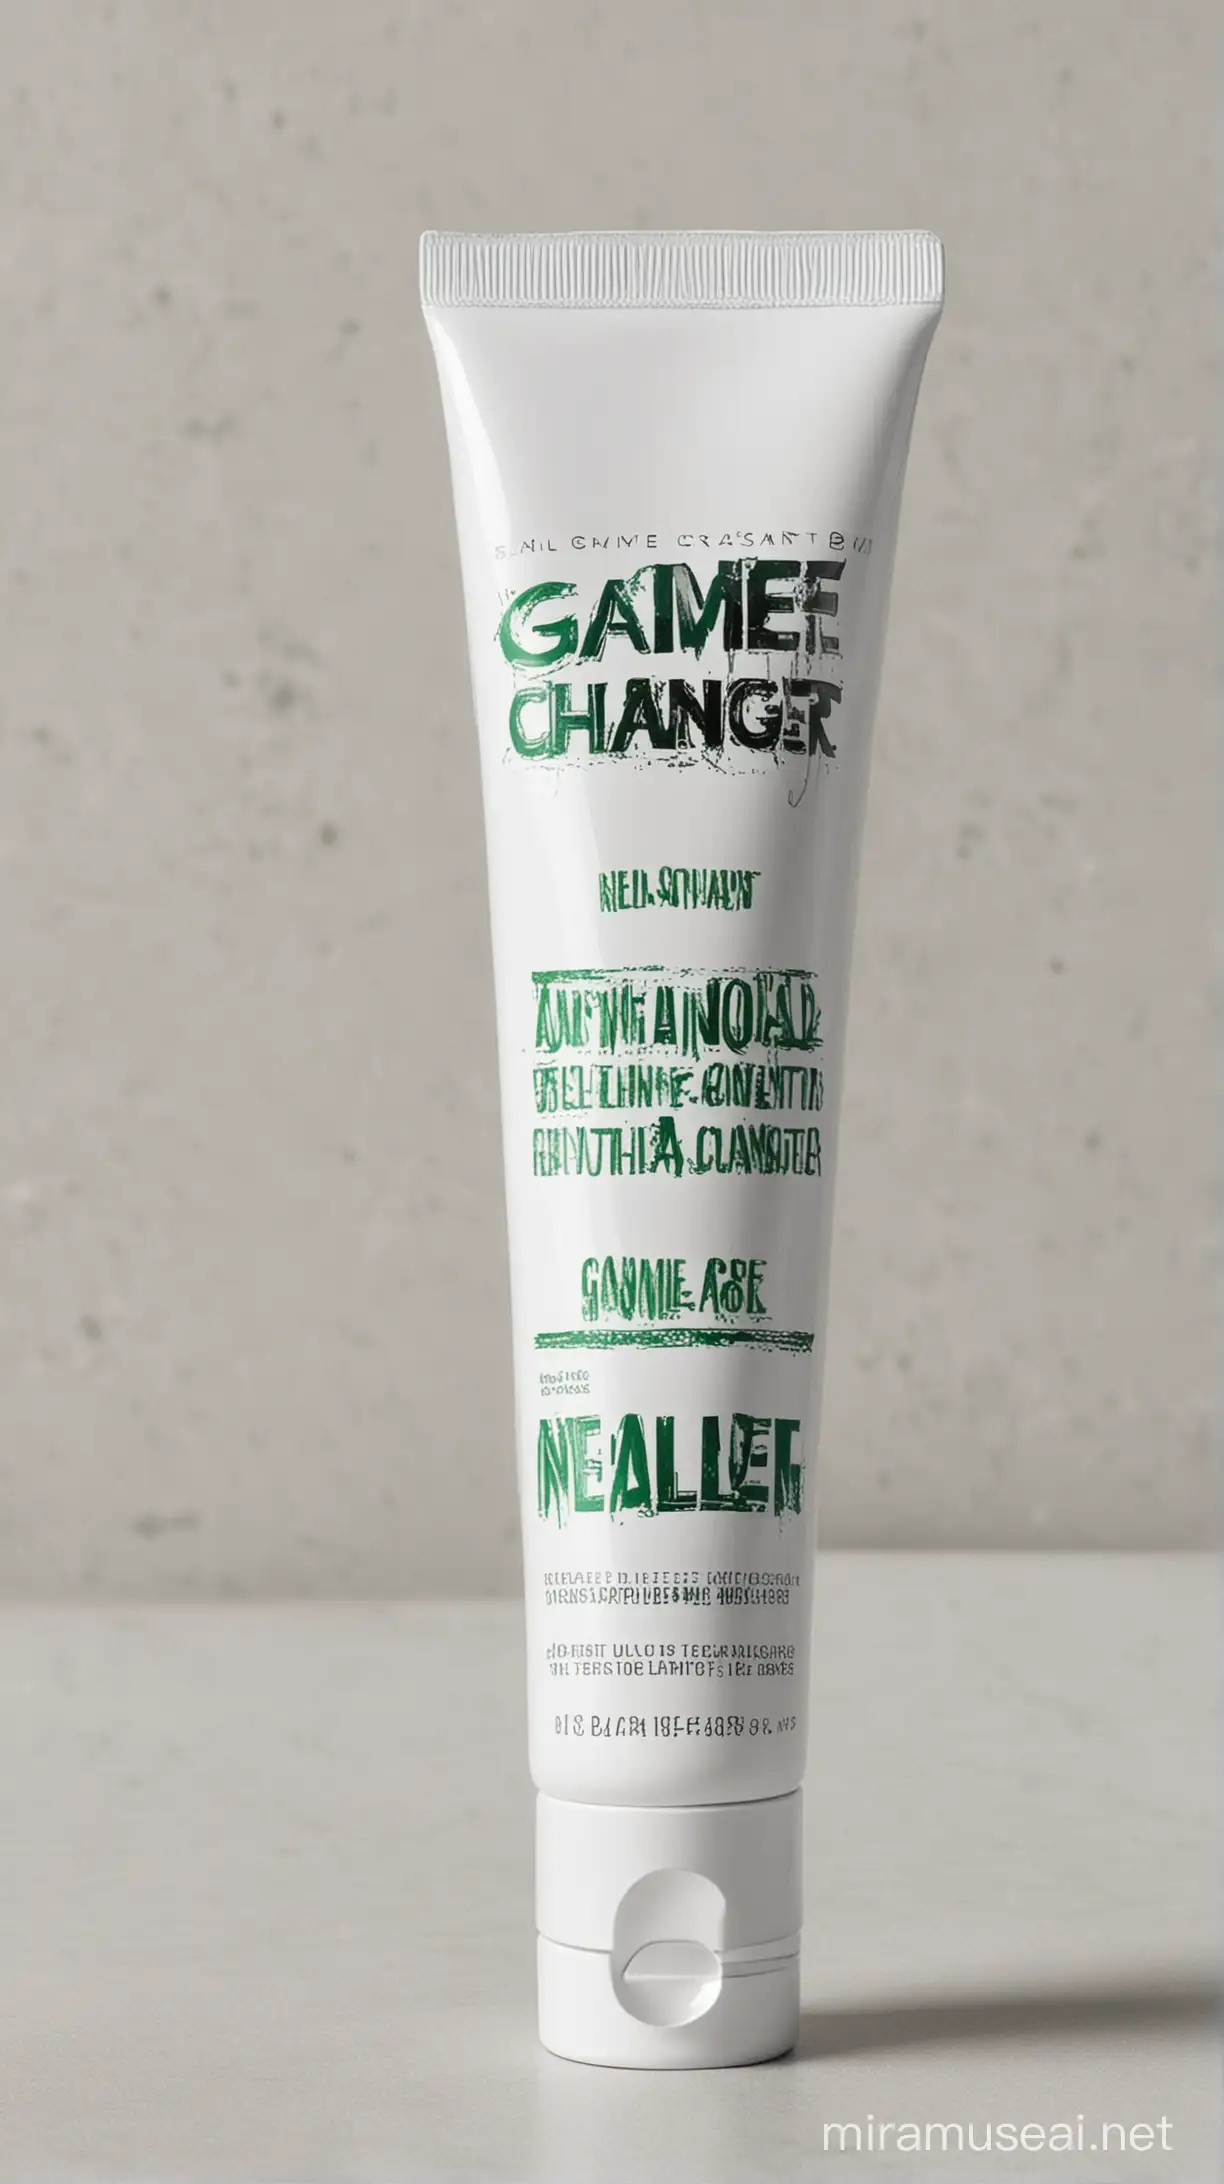 Revolutionary Toothpaste Packaging Design The Game Changer